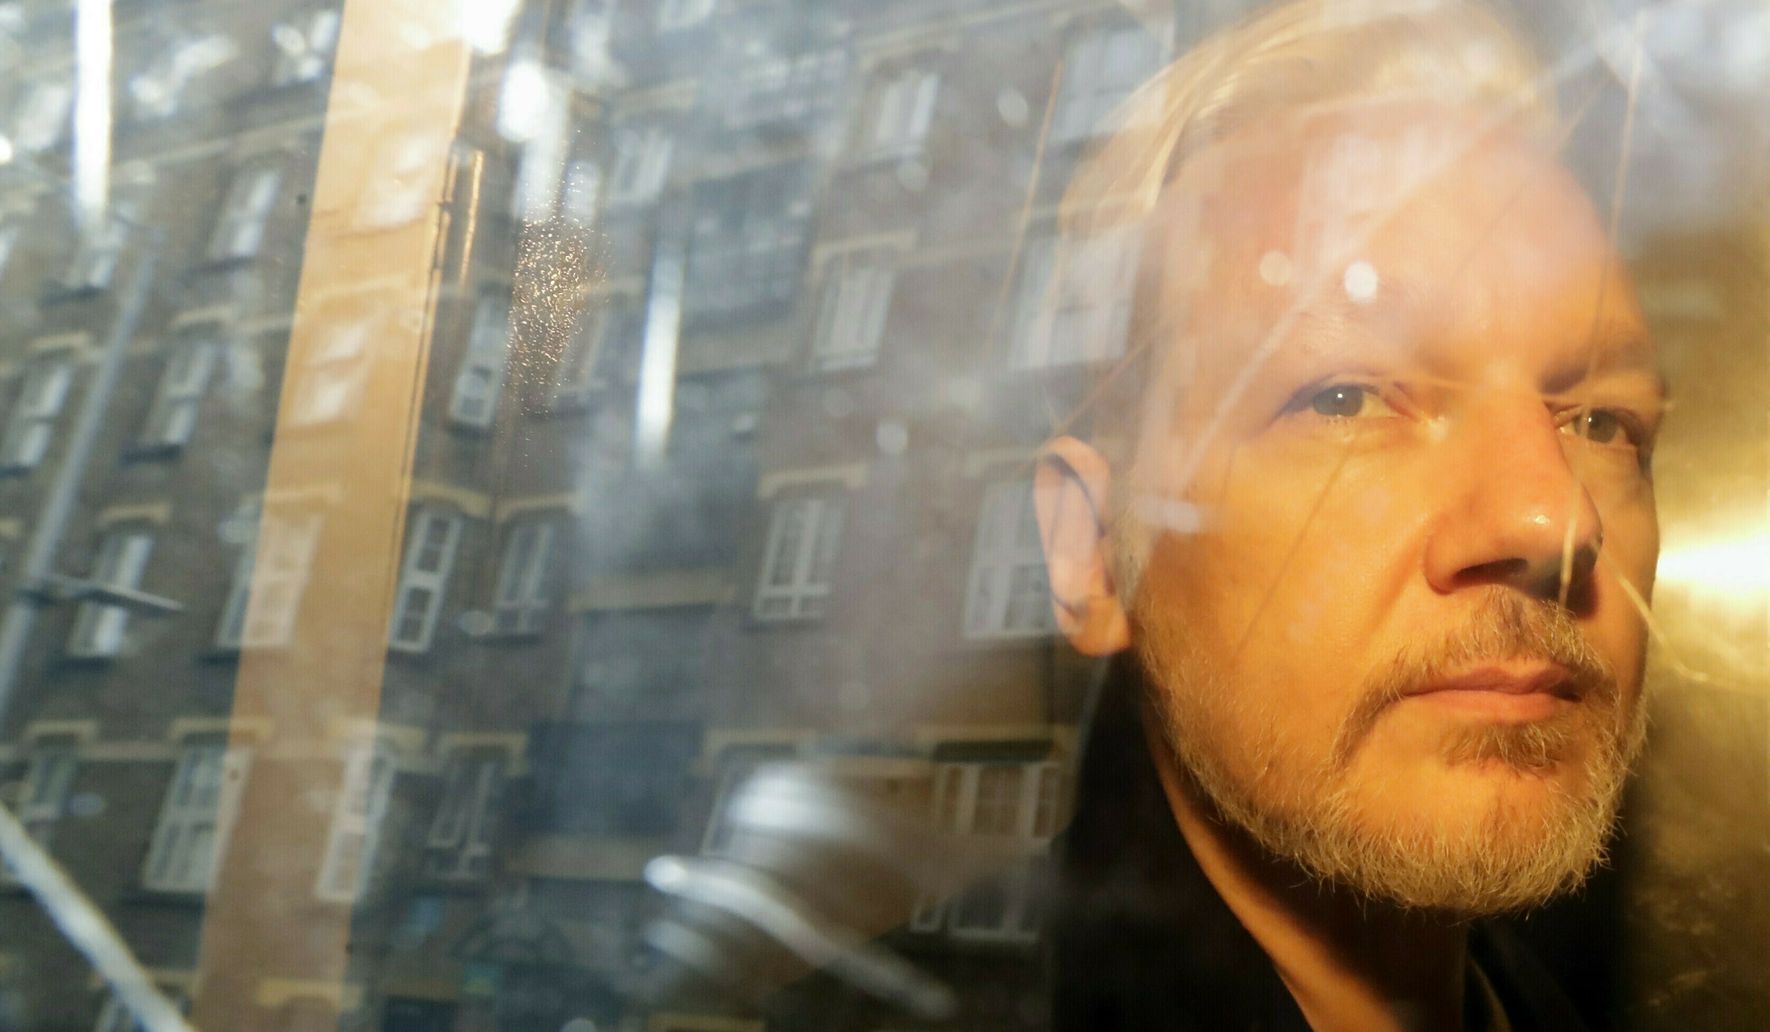 Julian Assange, Wikileaks founder, indicted on 18 charges